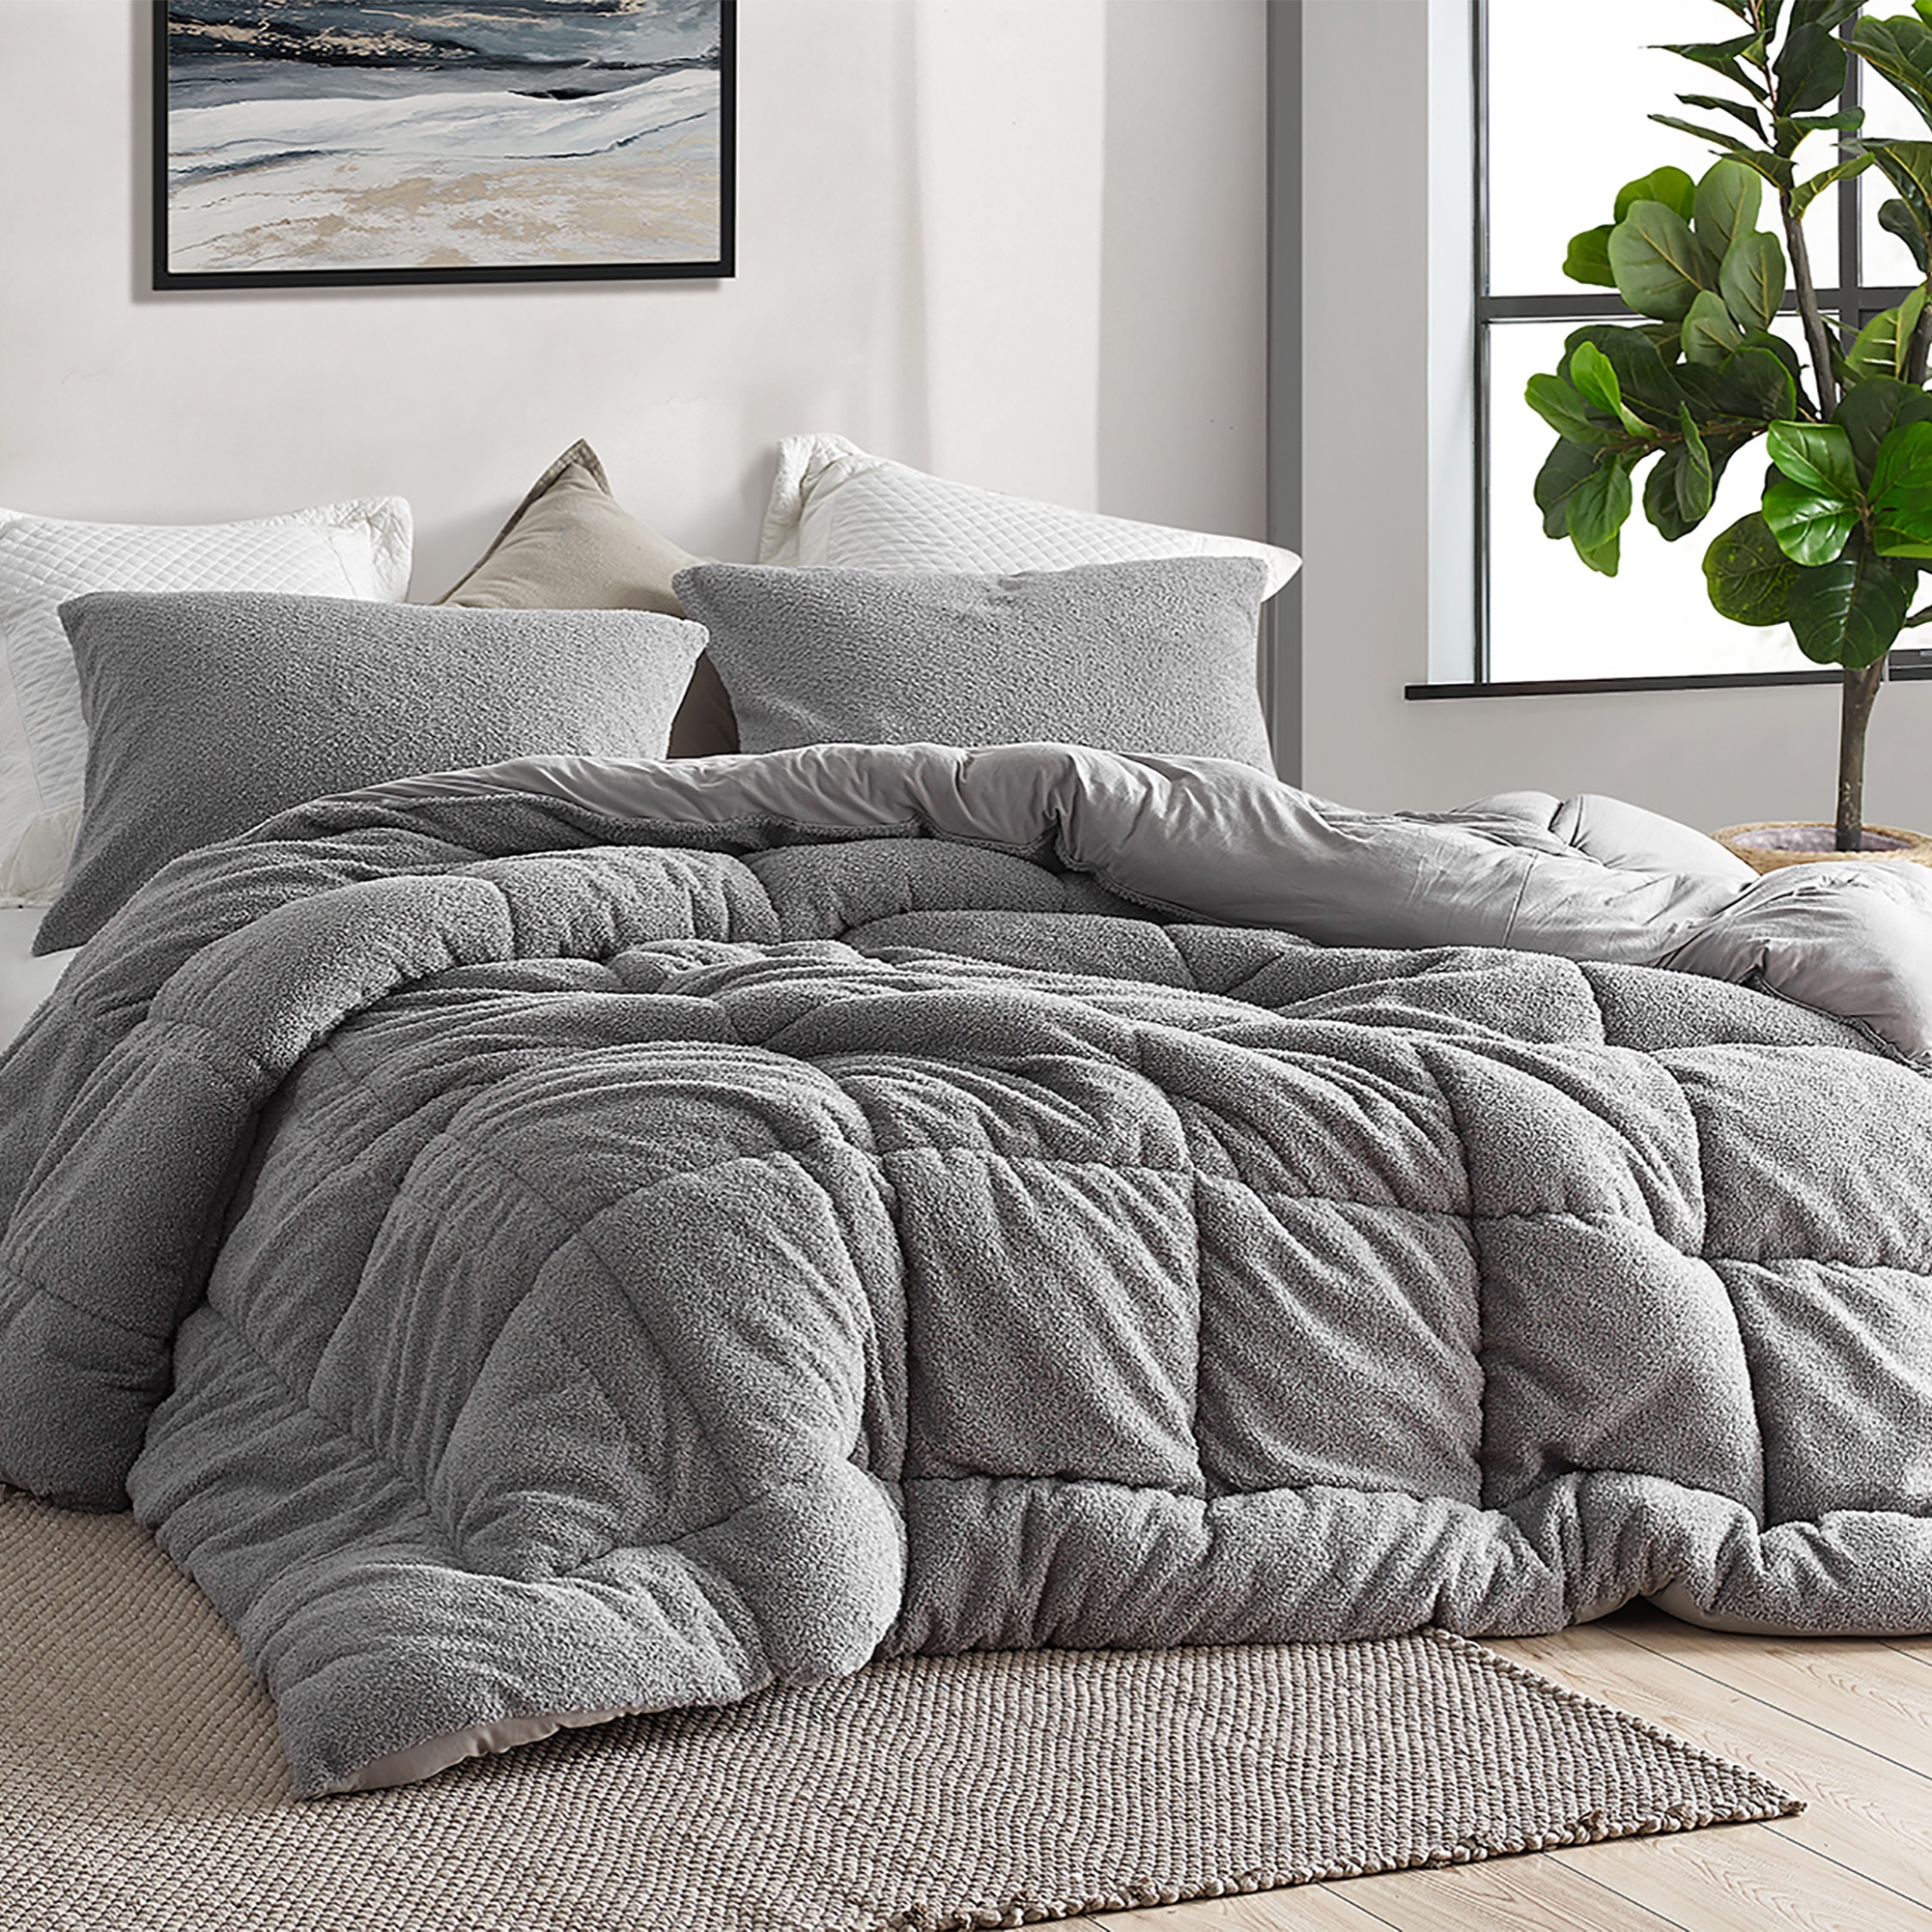 Oh Sweetie Bare - Coma Inducer Oversized Comforter - Alloy